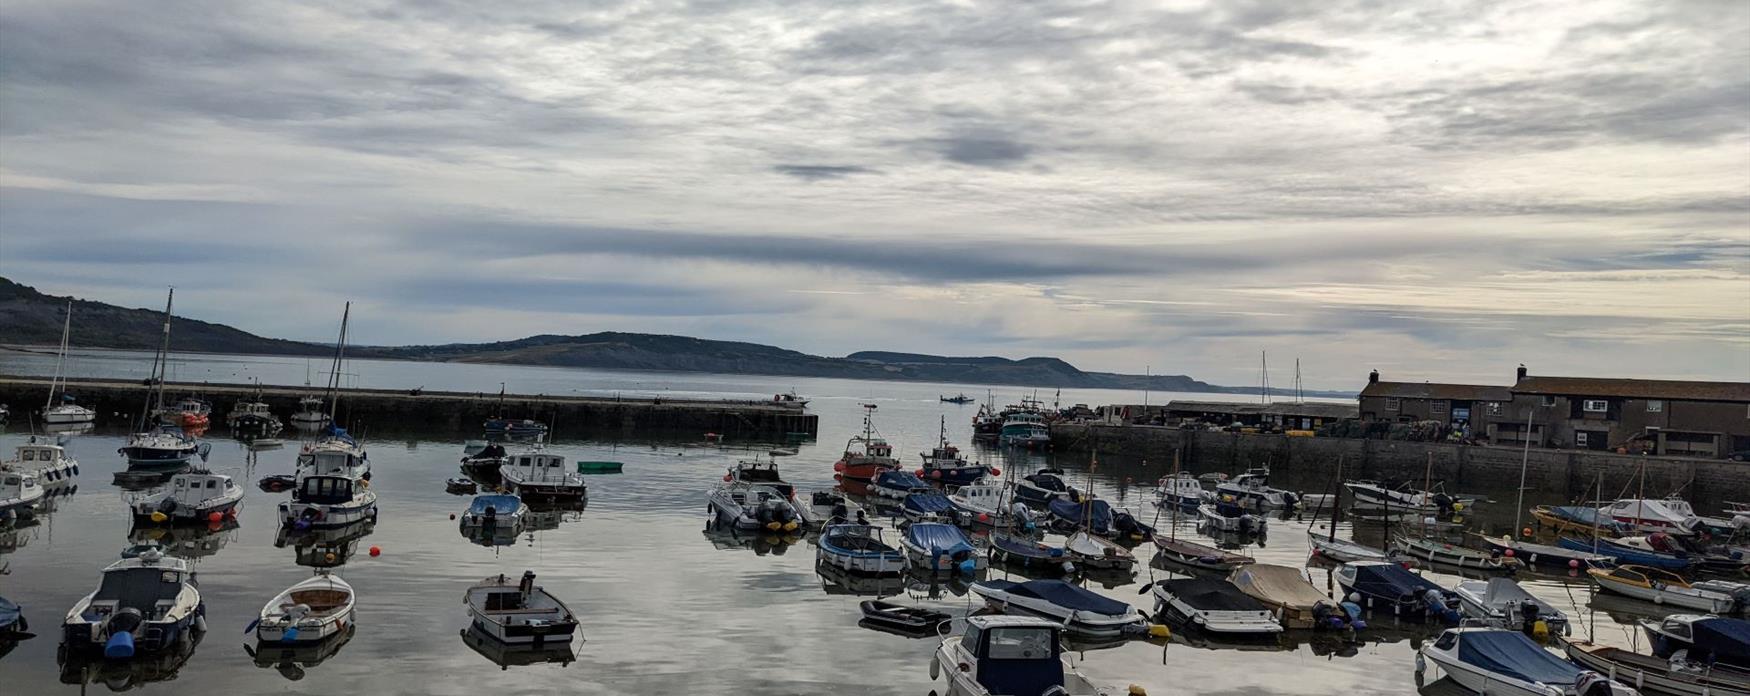 Small boats in a marina at Lyme Regis harbour. The sky is cloudy creating a dramatic sky which is reflected on the sea and the sun is glistening off the sea underneath the boats. The Cliffs of the Jurassic coast extend off away from the image into the distance.